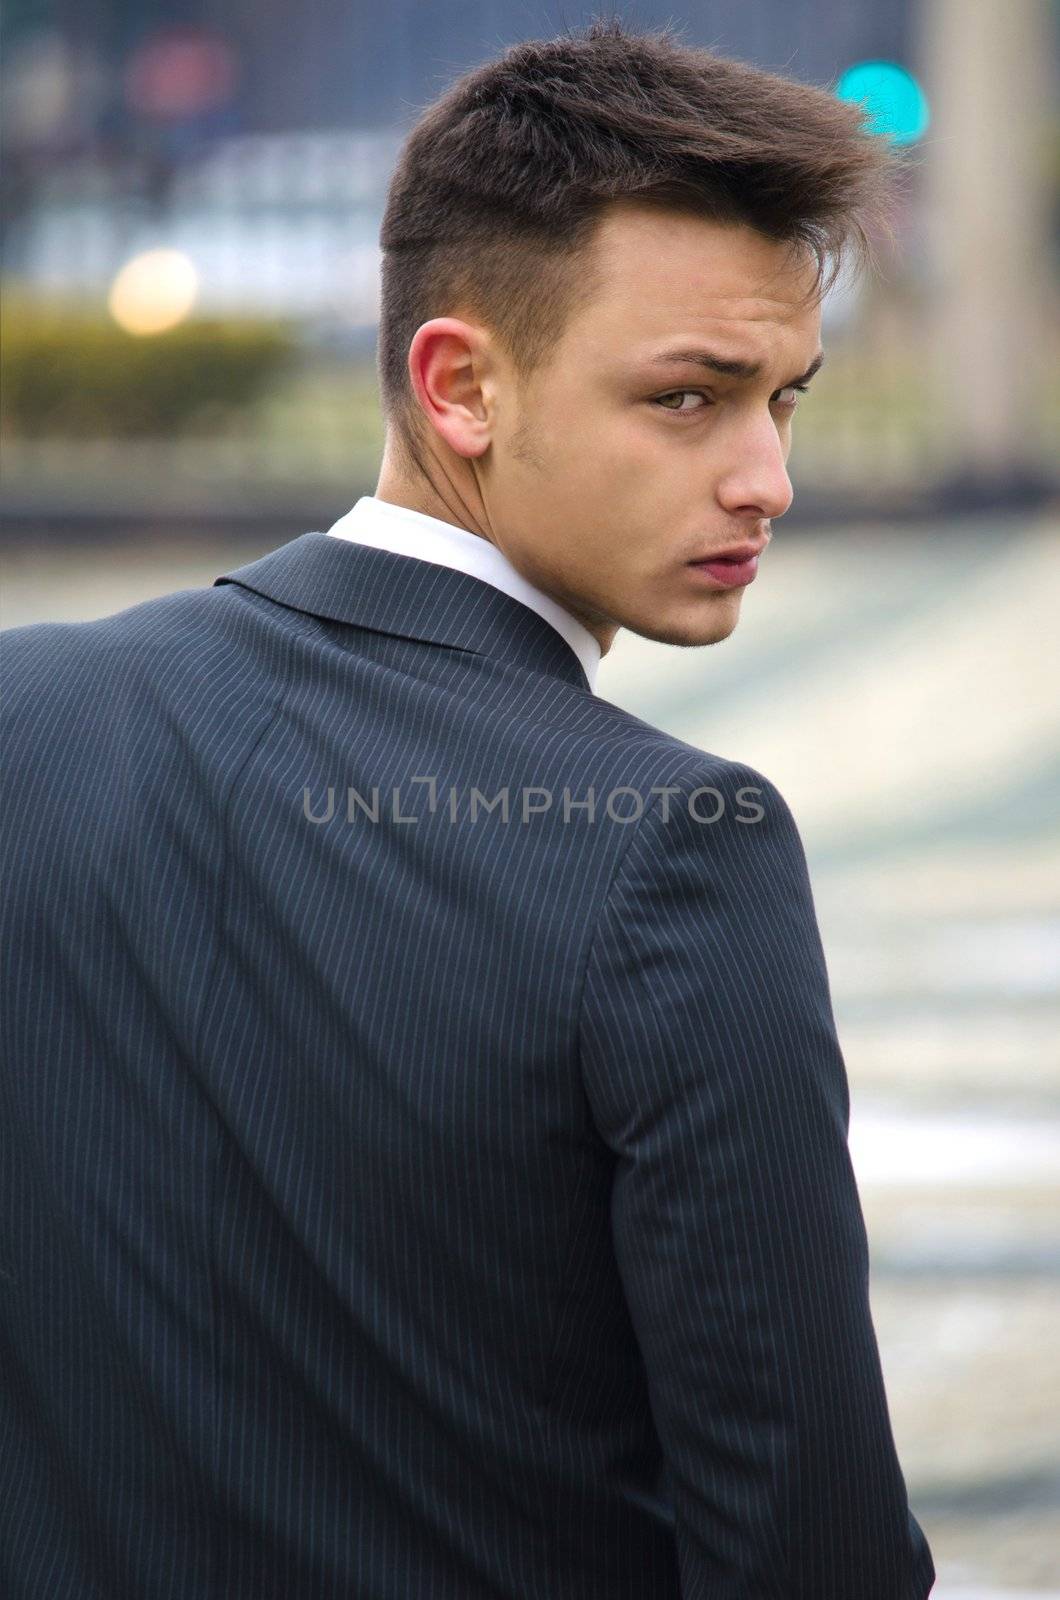 Attractive young man in suit seen from the back looking in camera